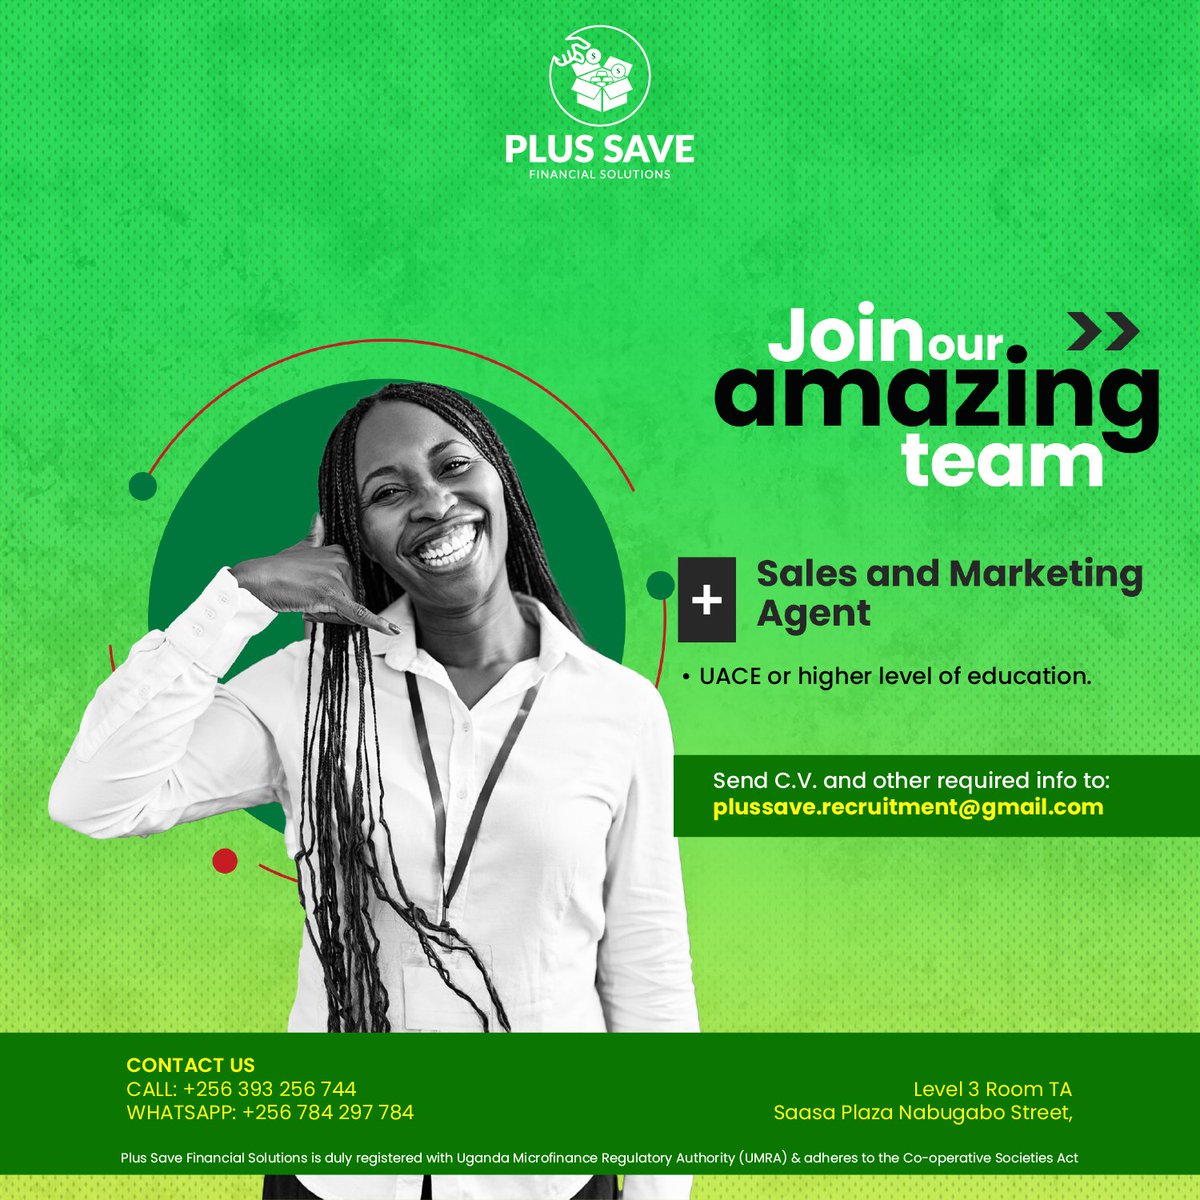 ENTRY-LEVEL JOBALERT 🚨

@Plussave_ is currently hiring sales and marketing agents to join its team.
Minimum qualification UACE 

#jobclinicug #jobs #hiring #jobsinuganda #ApplyNow #careers #jobalerts